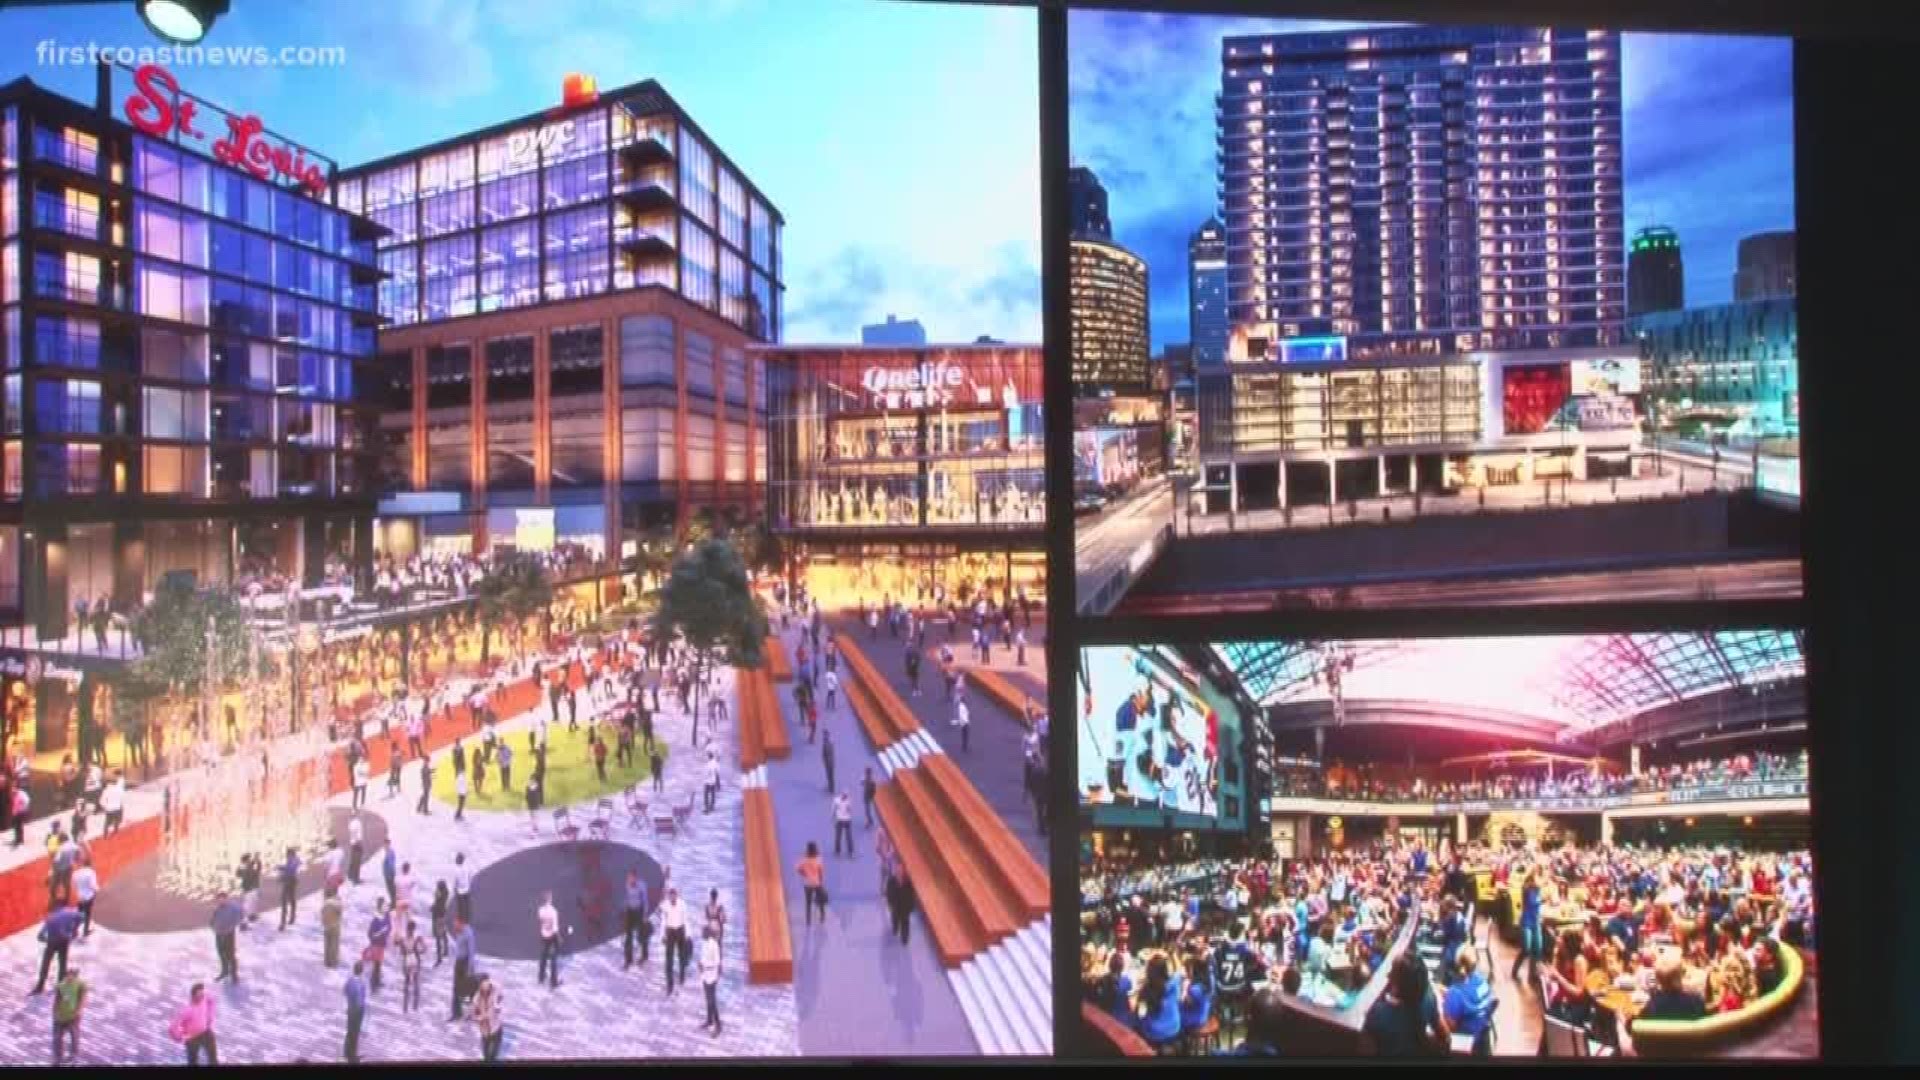 Mayor Curry believes the project will strengthen Jacksonville's downtown and will position Jacksonville to be the host of "world-class" events in the future.